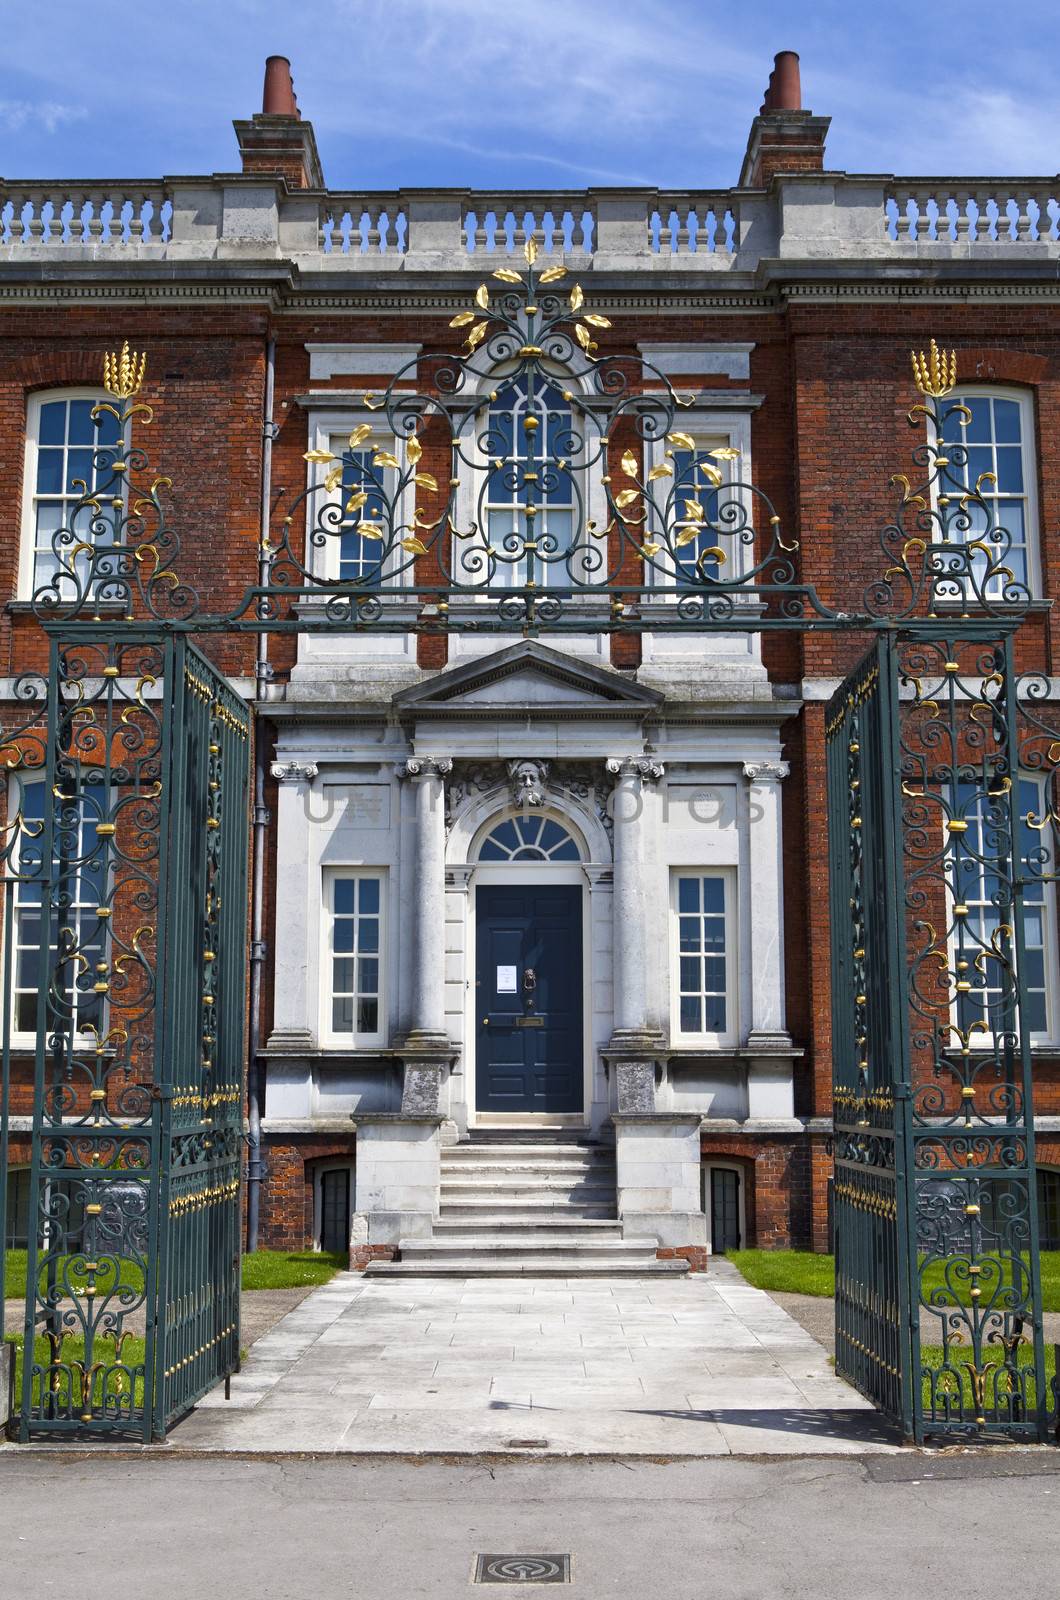 The magnificent Georgian-style Ranger's House in Greenwich, London.